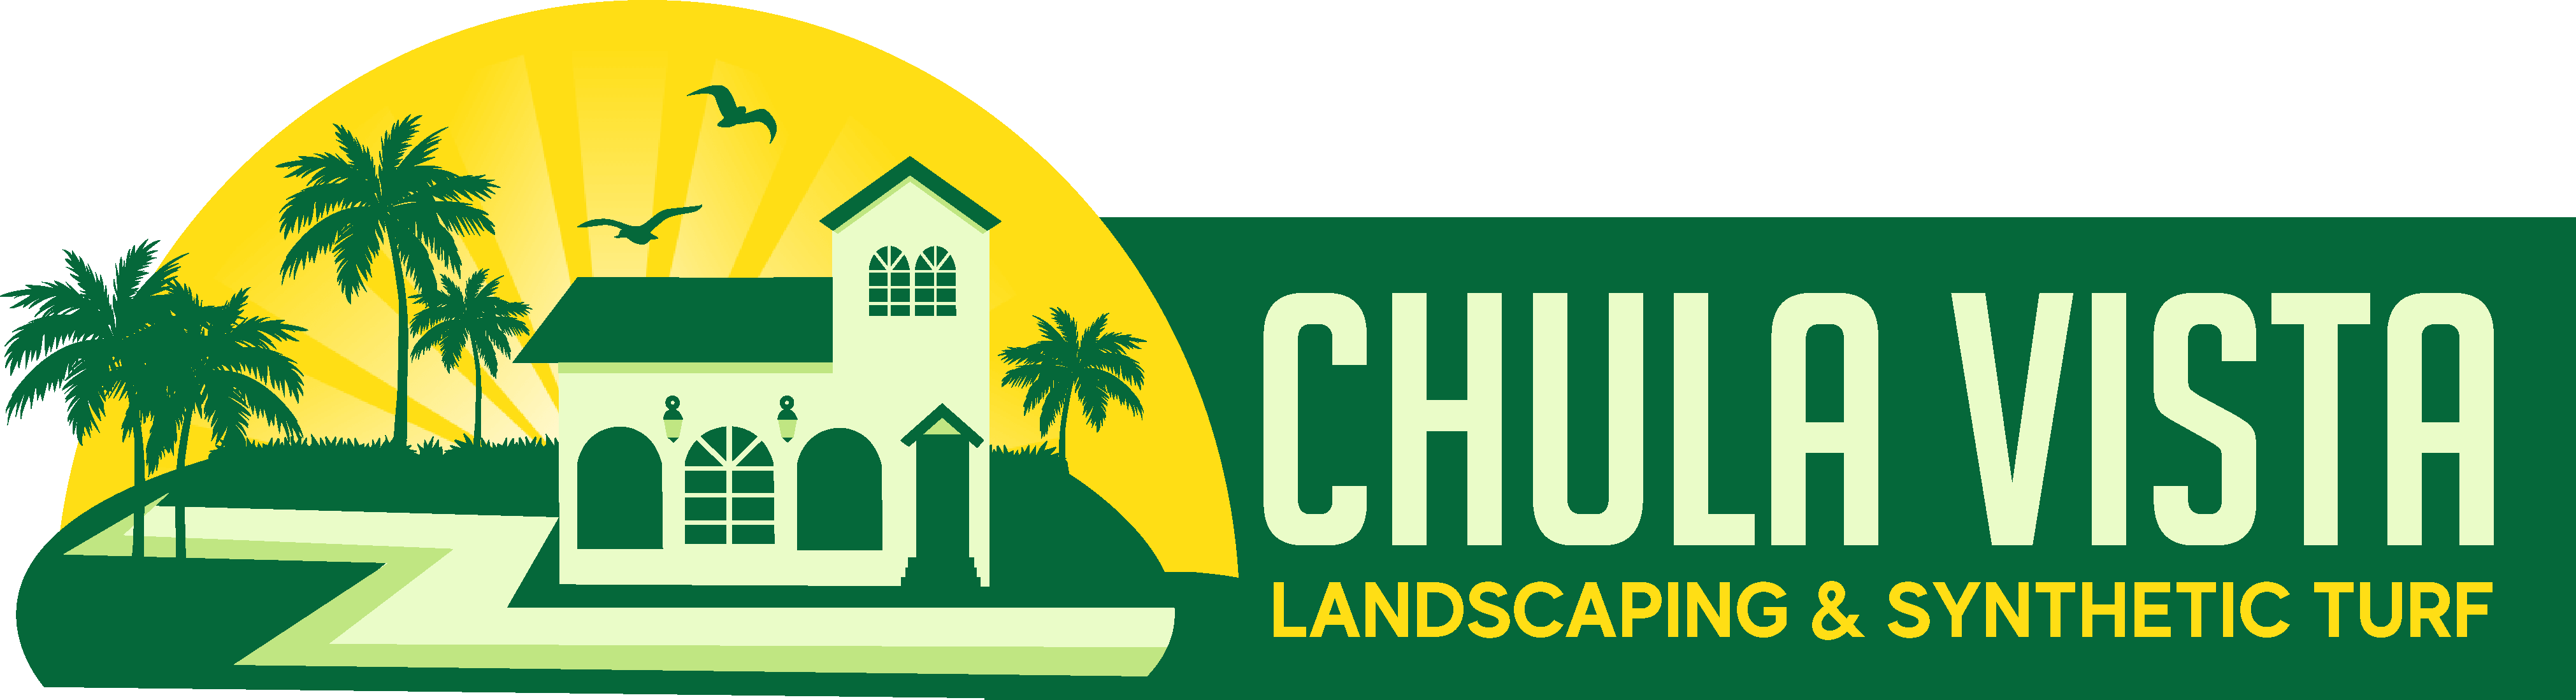 Chula Vista Landscaping and Synthetic Turf Colored Horizontal Logo 2